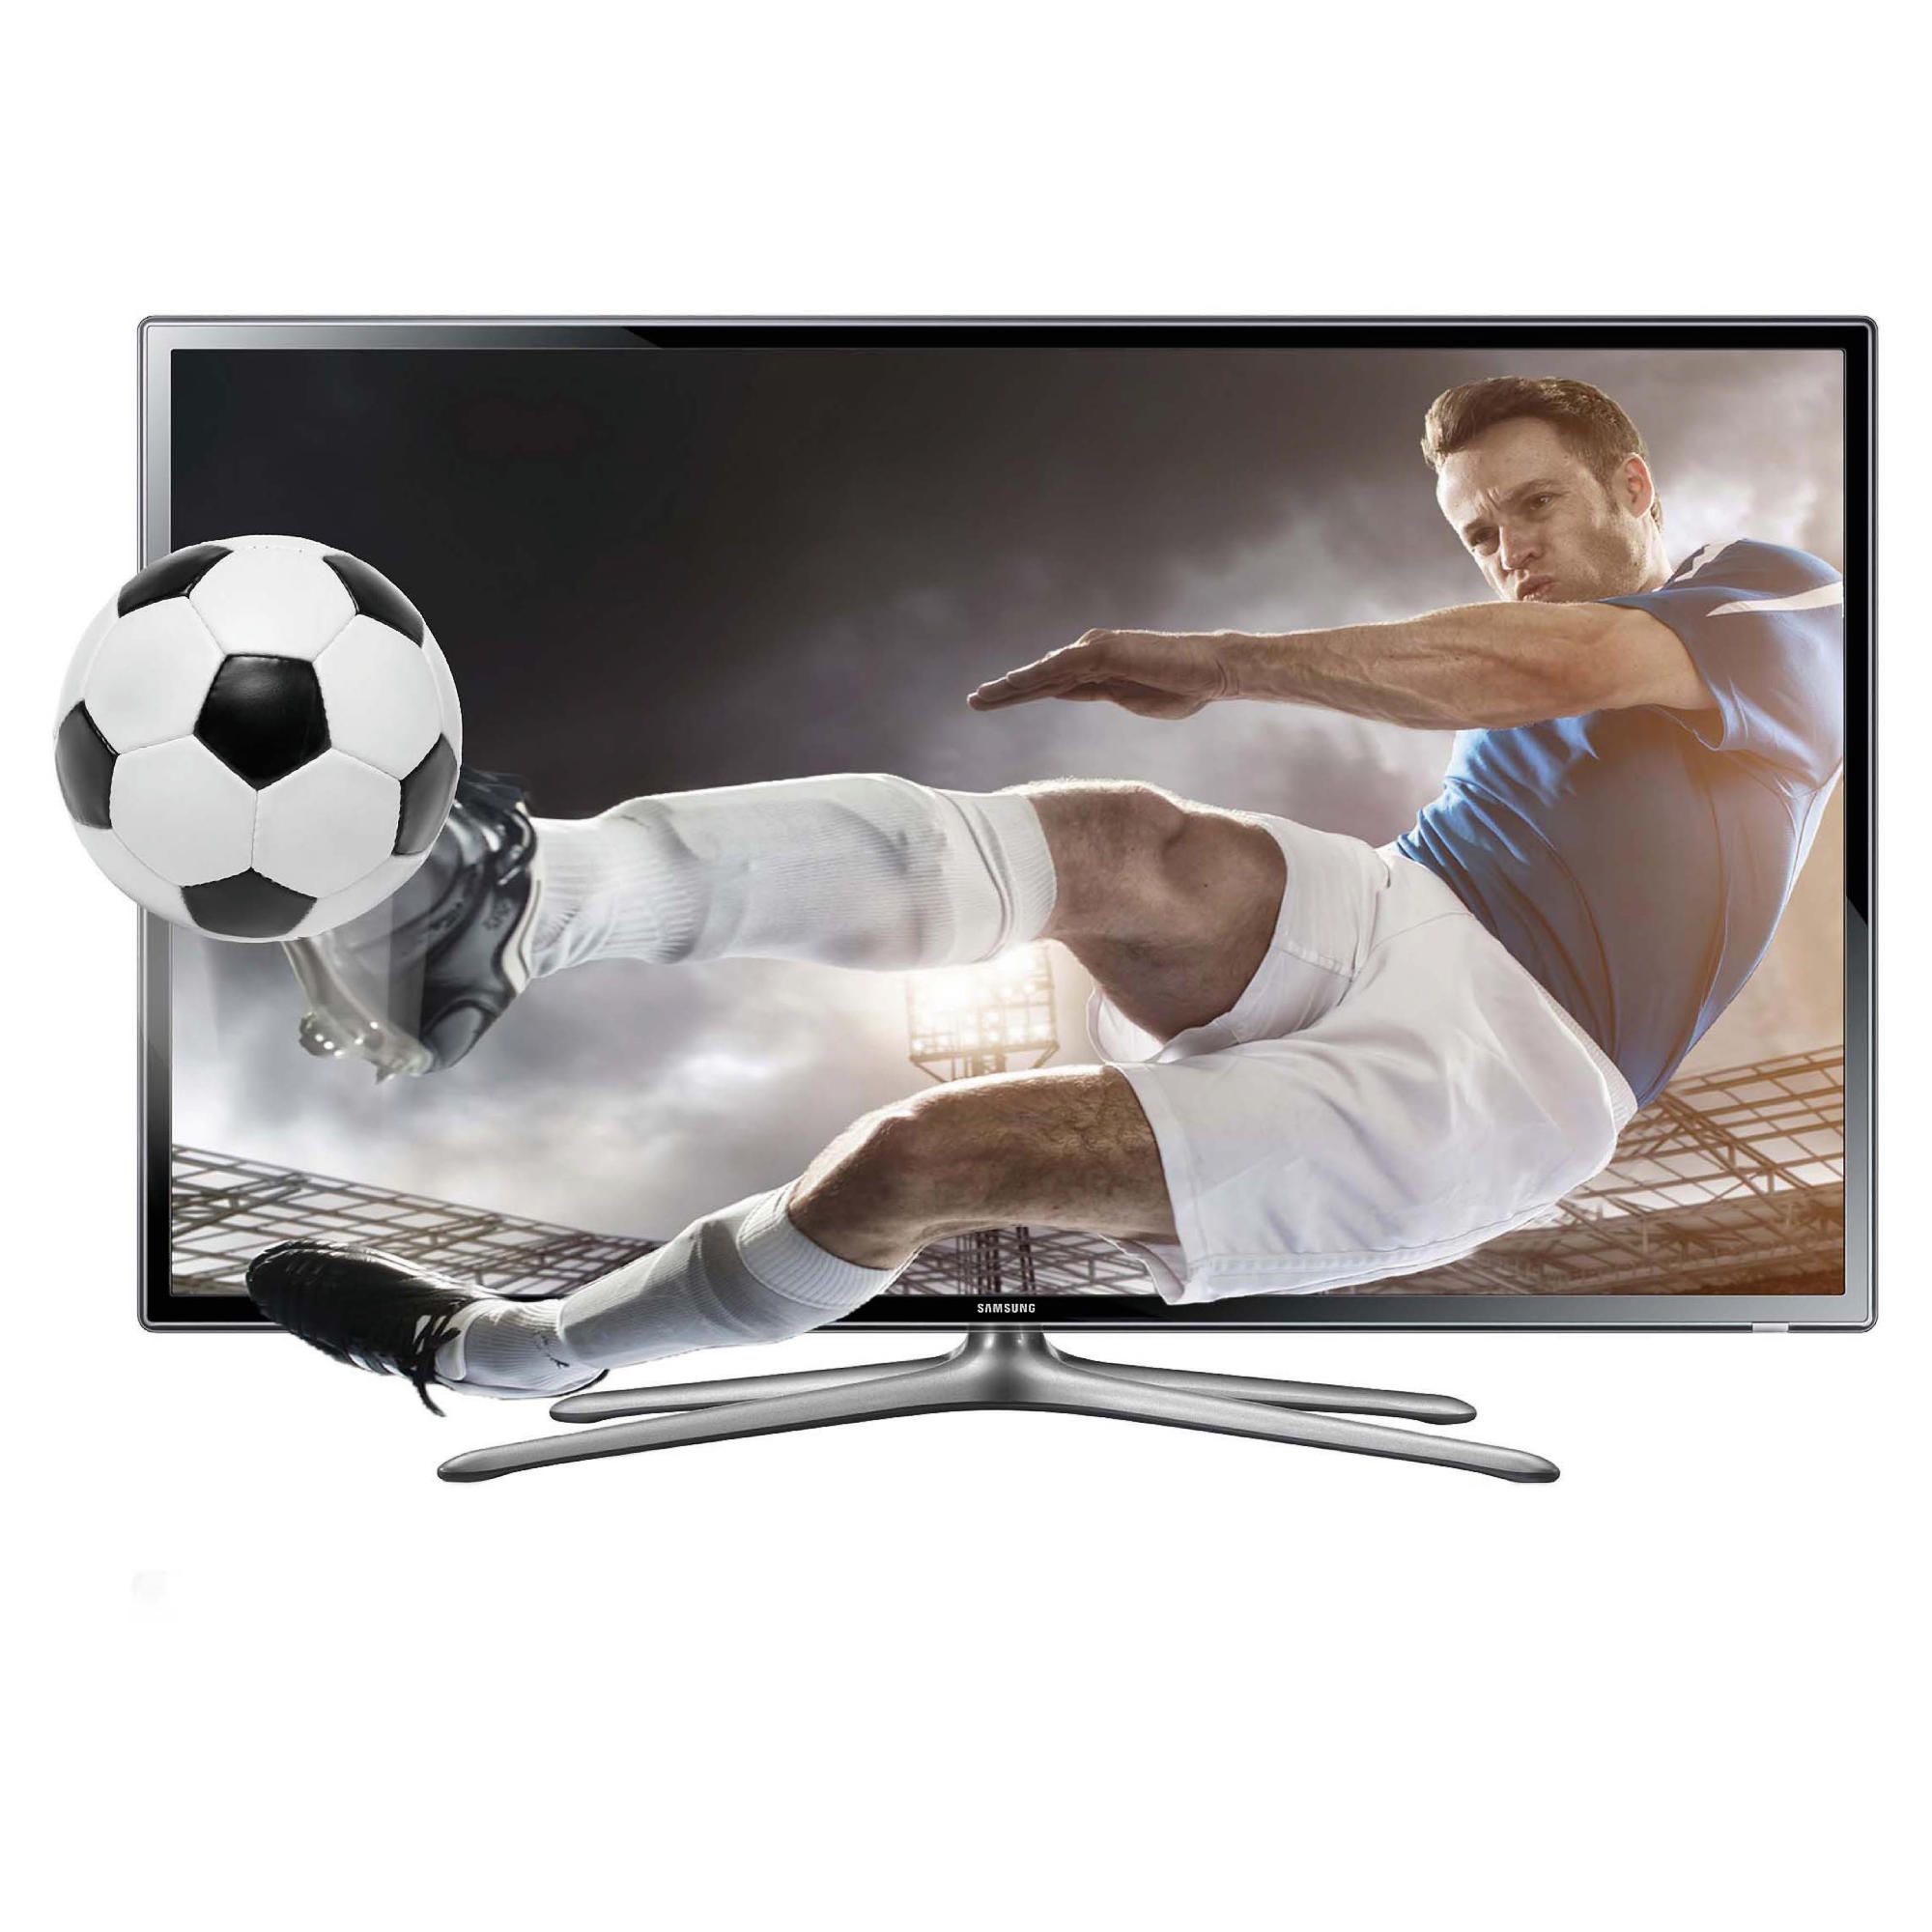 Samsung UE40F6100 40 inch Full HD 1080p 3D E-LED TV with Freeview HD